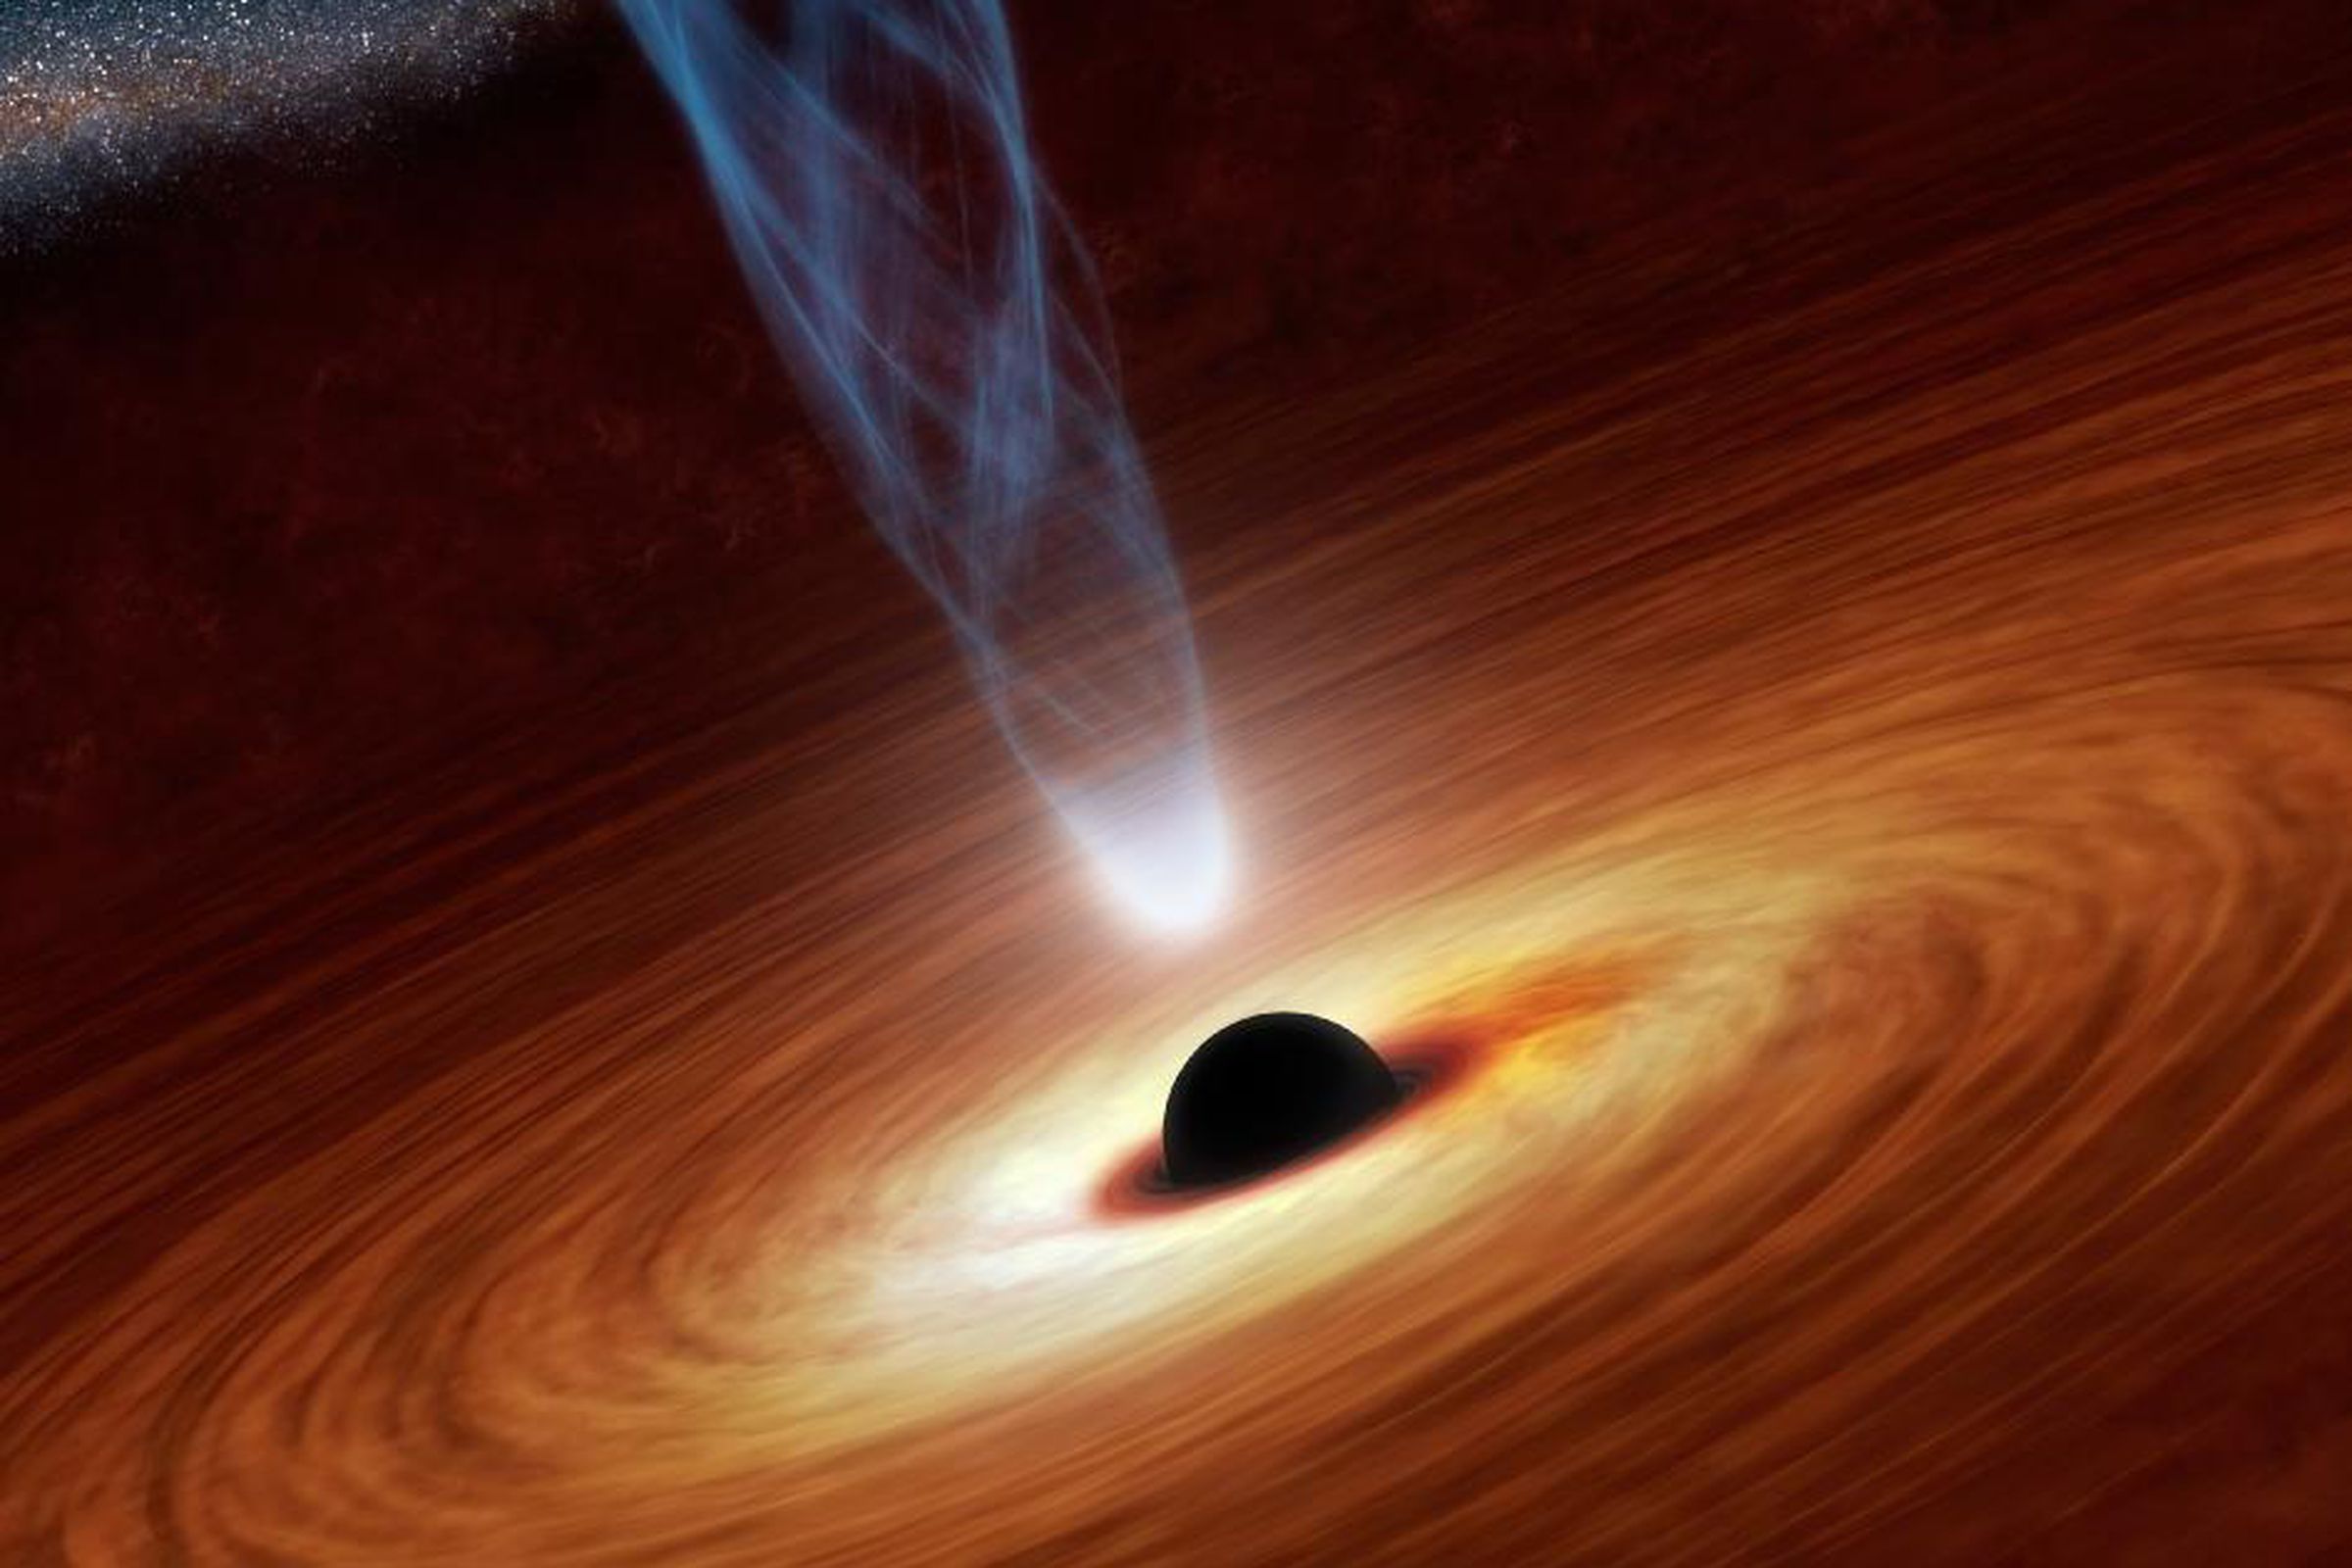 NASA artist's concept of a supermassive black hole emitting high-energy x-rays.